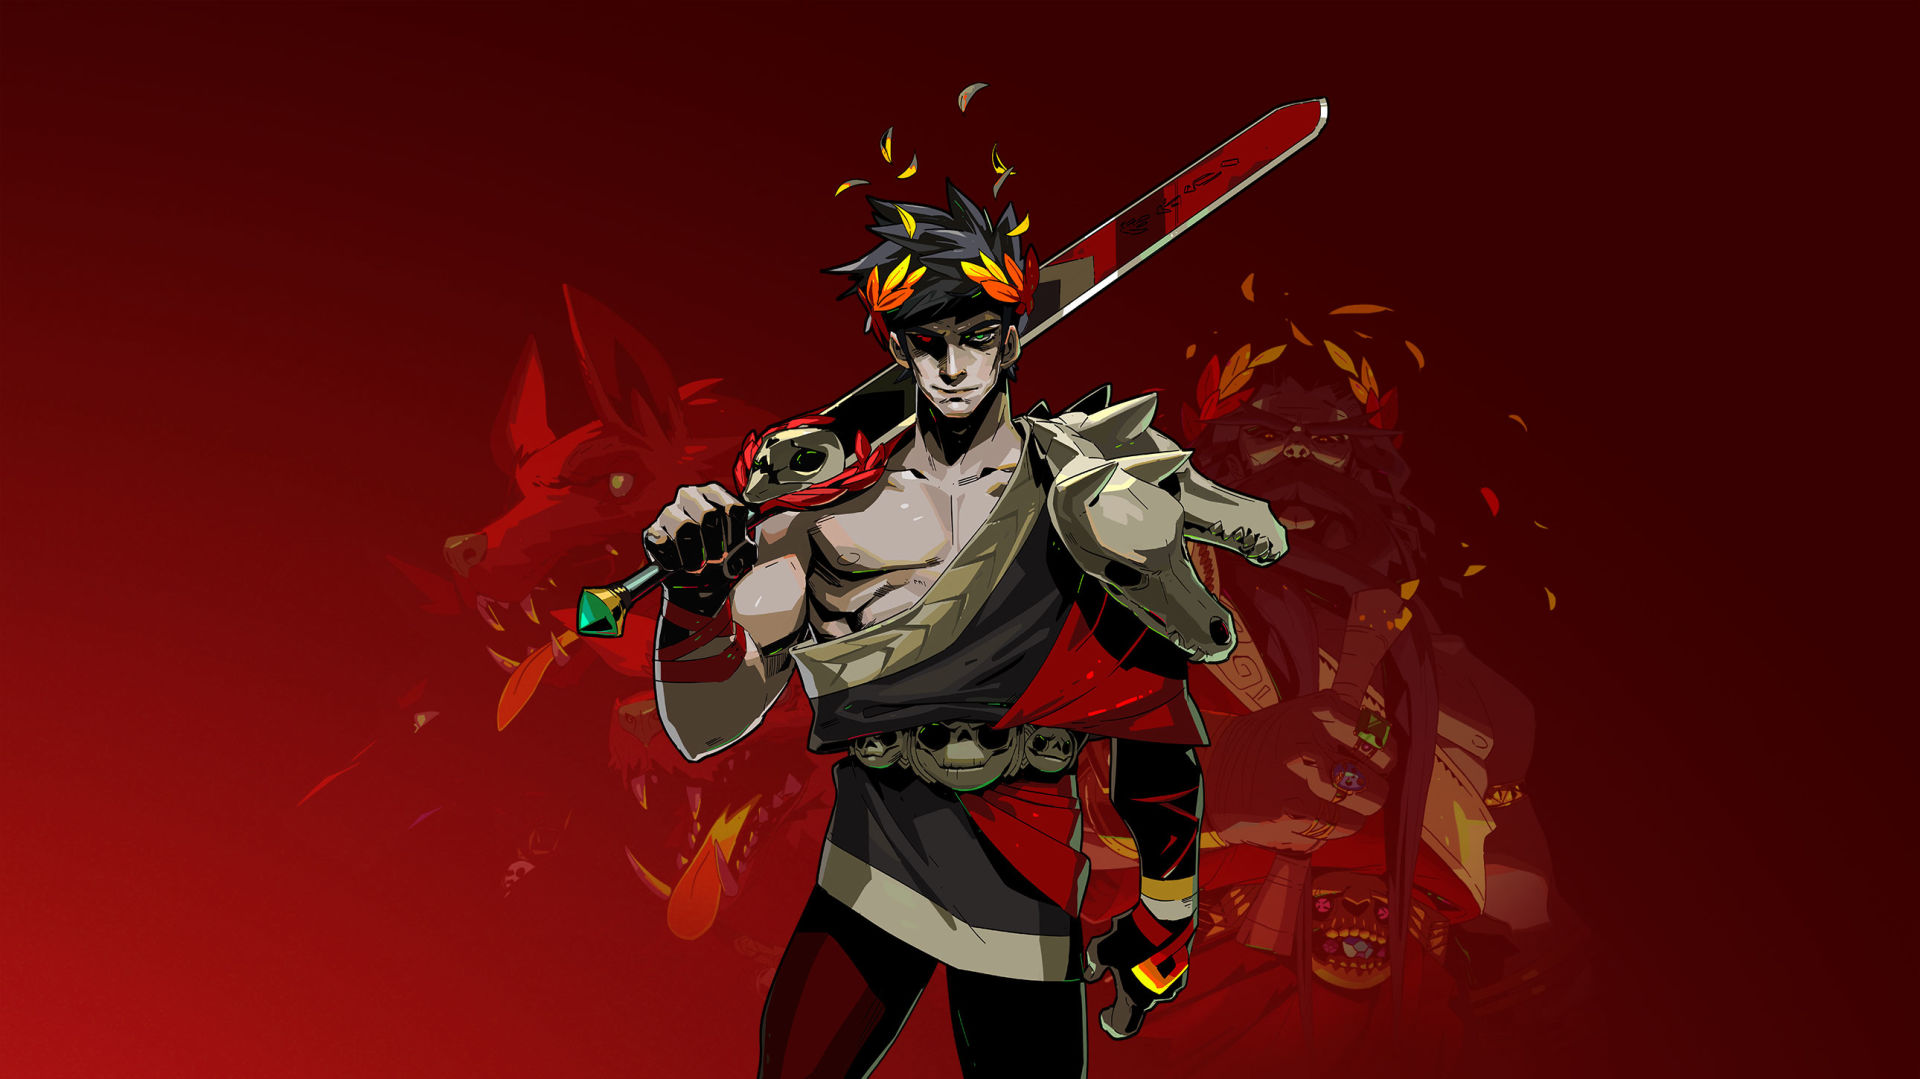 A greek god with black hair and yellow, leaf crown holding a large sword and standing stoically. Behind him is a red background with a three-headed dog.